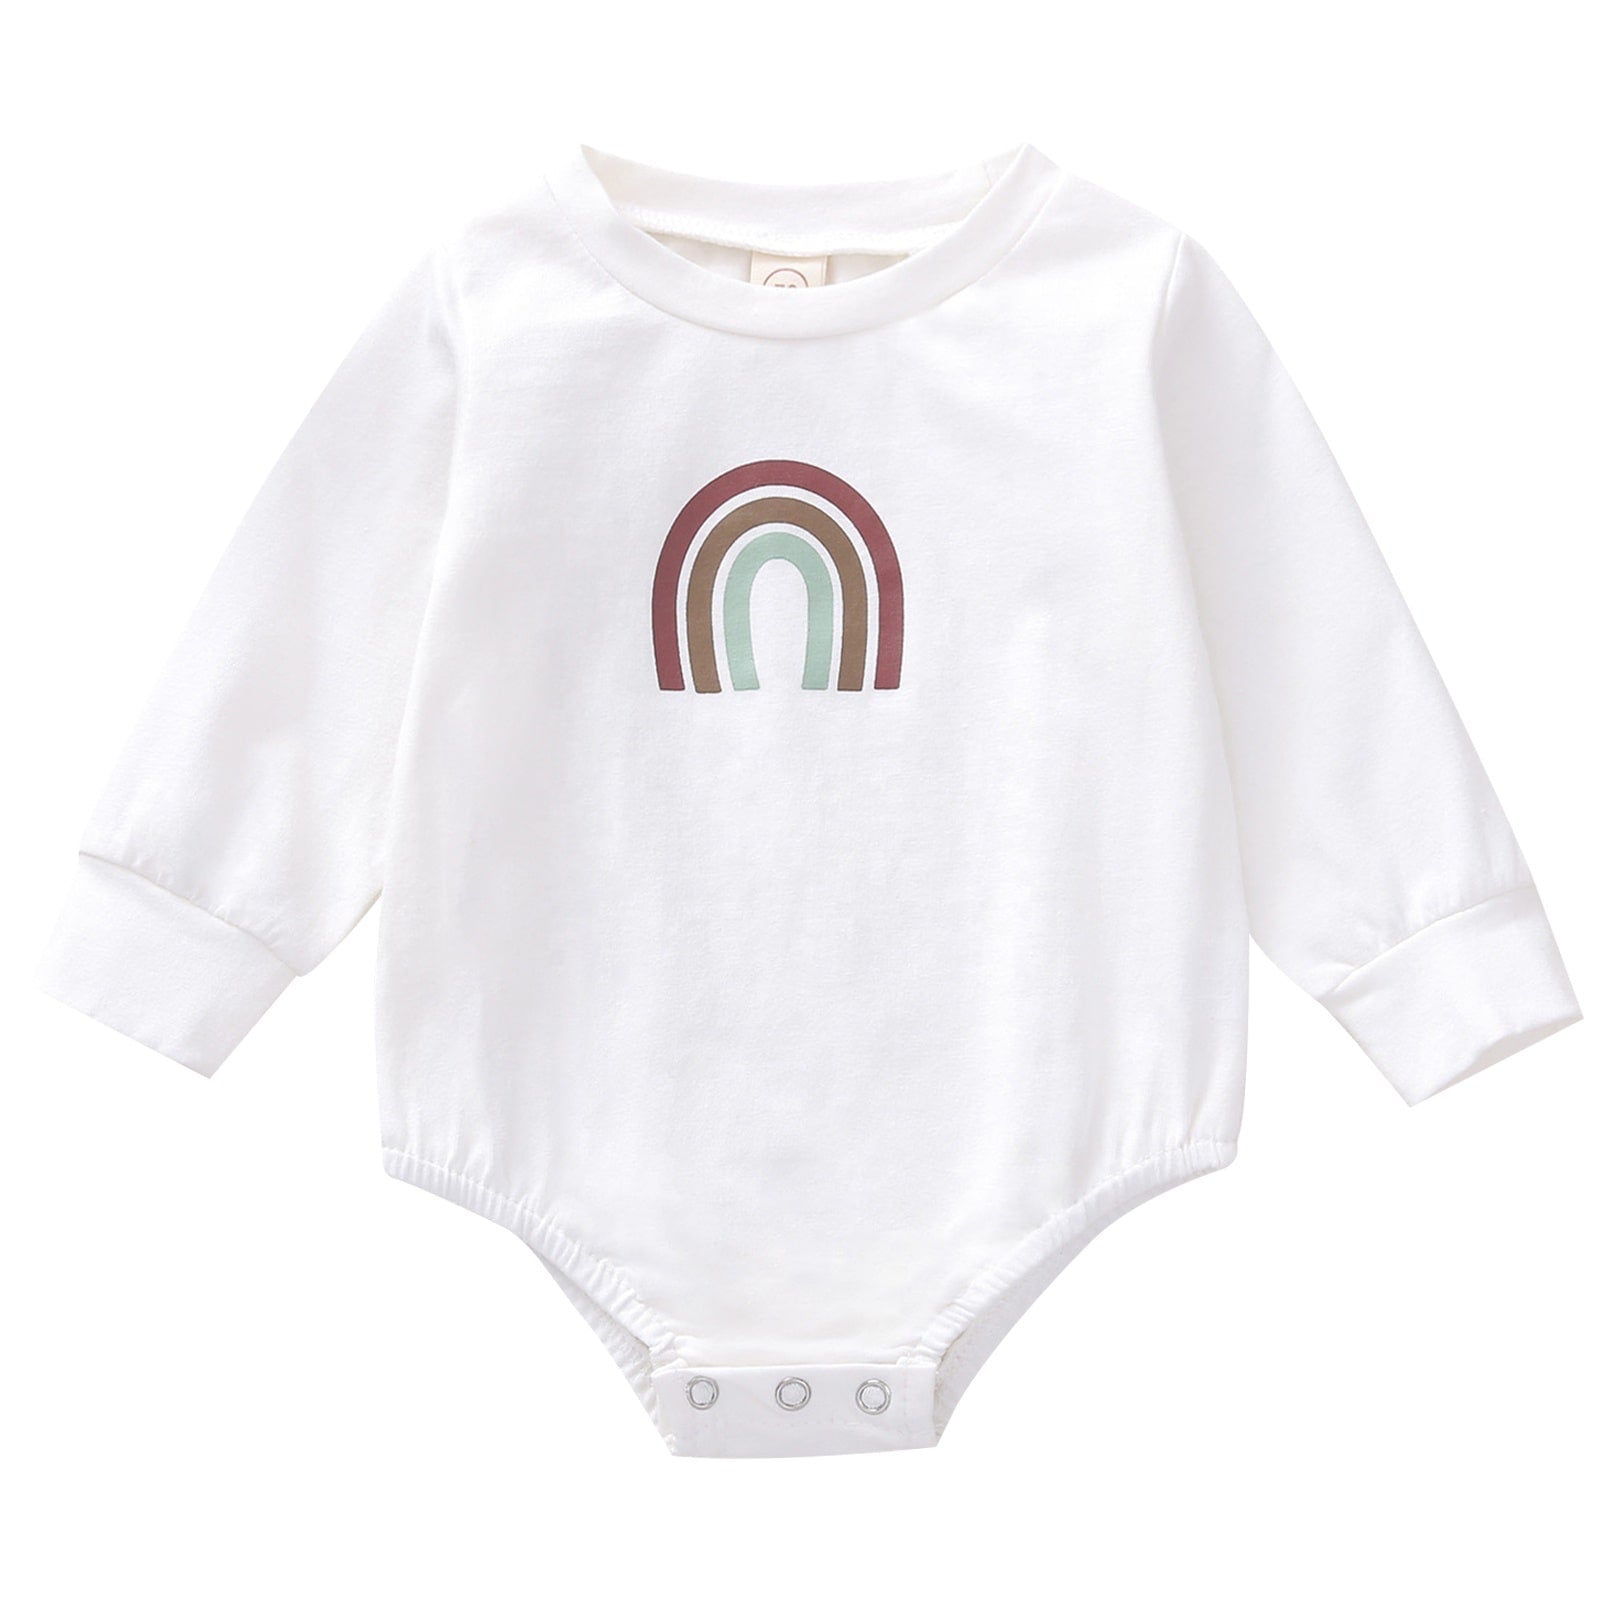 Rainbow Romper - Buy Baby One-Pieces at Louie Meets Lola